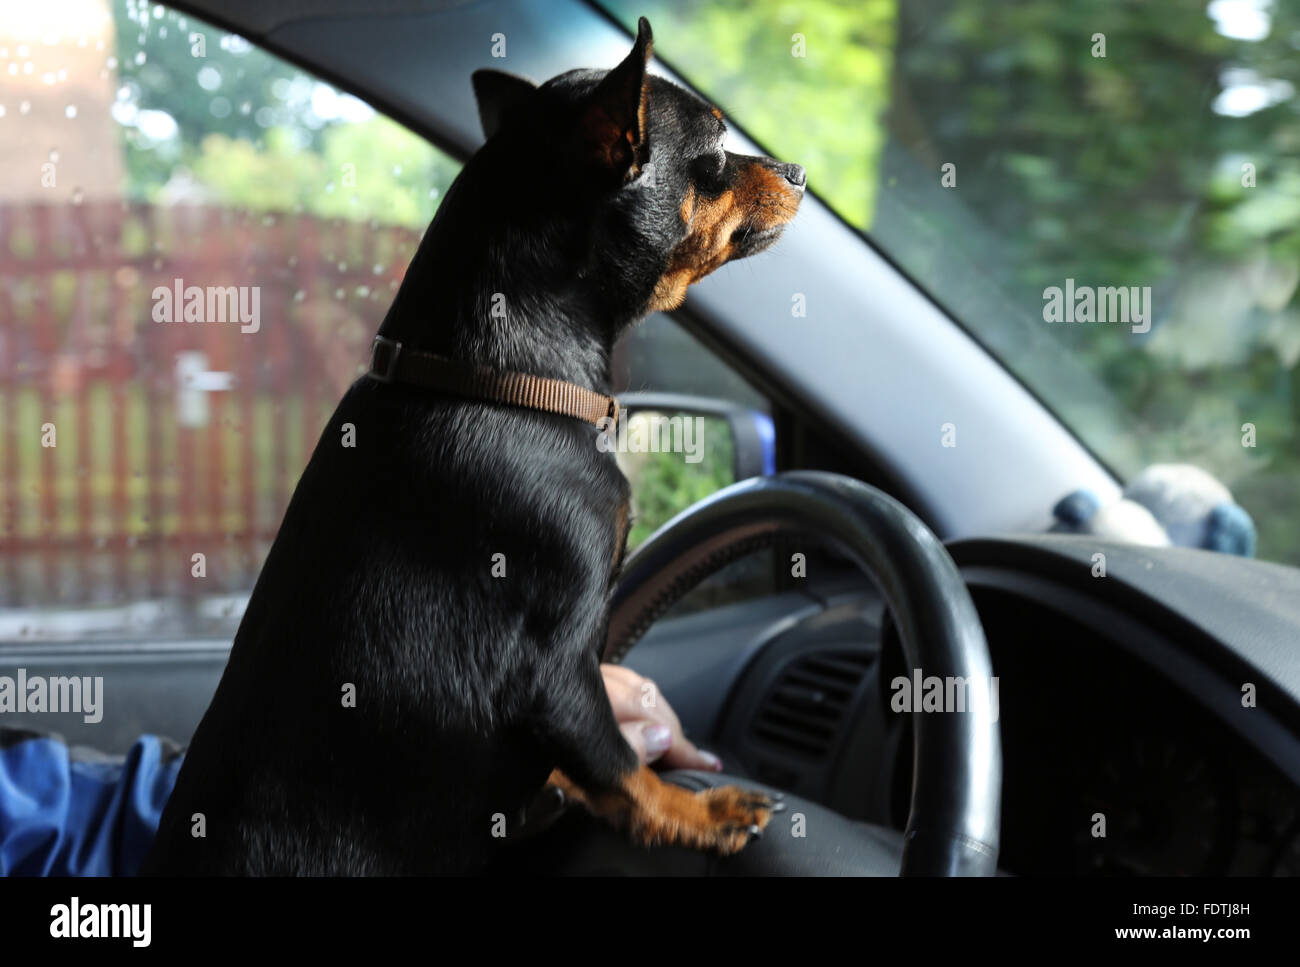 Schwerin, Germany, Prague Ratter looked over the steering wheel of a car Stock Photo